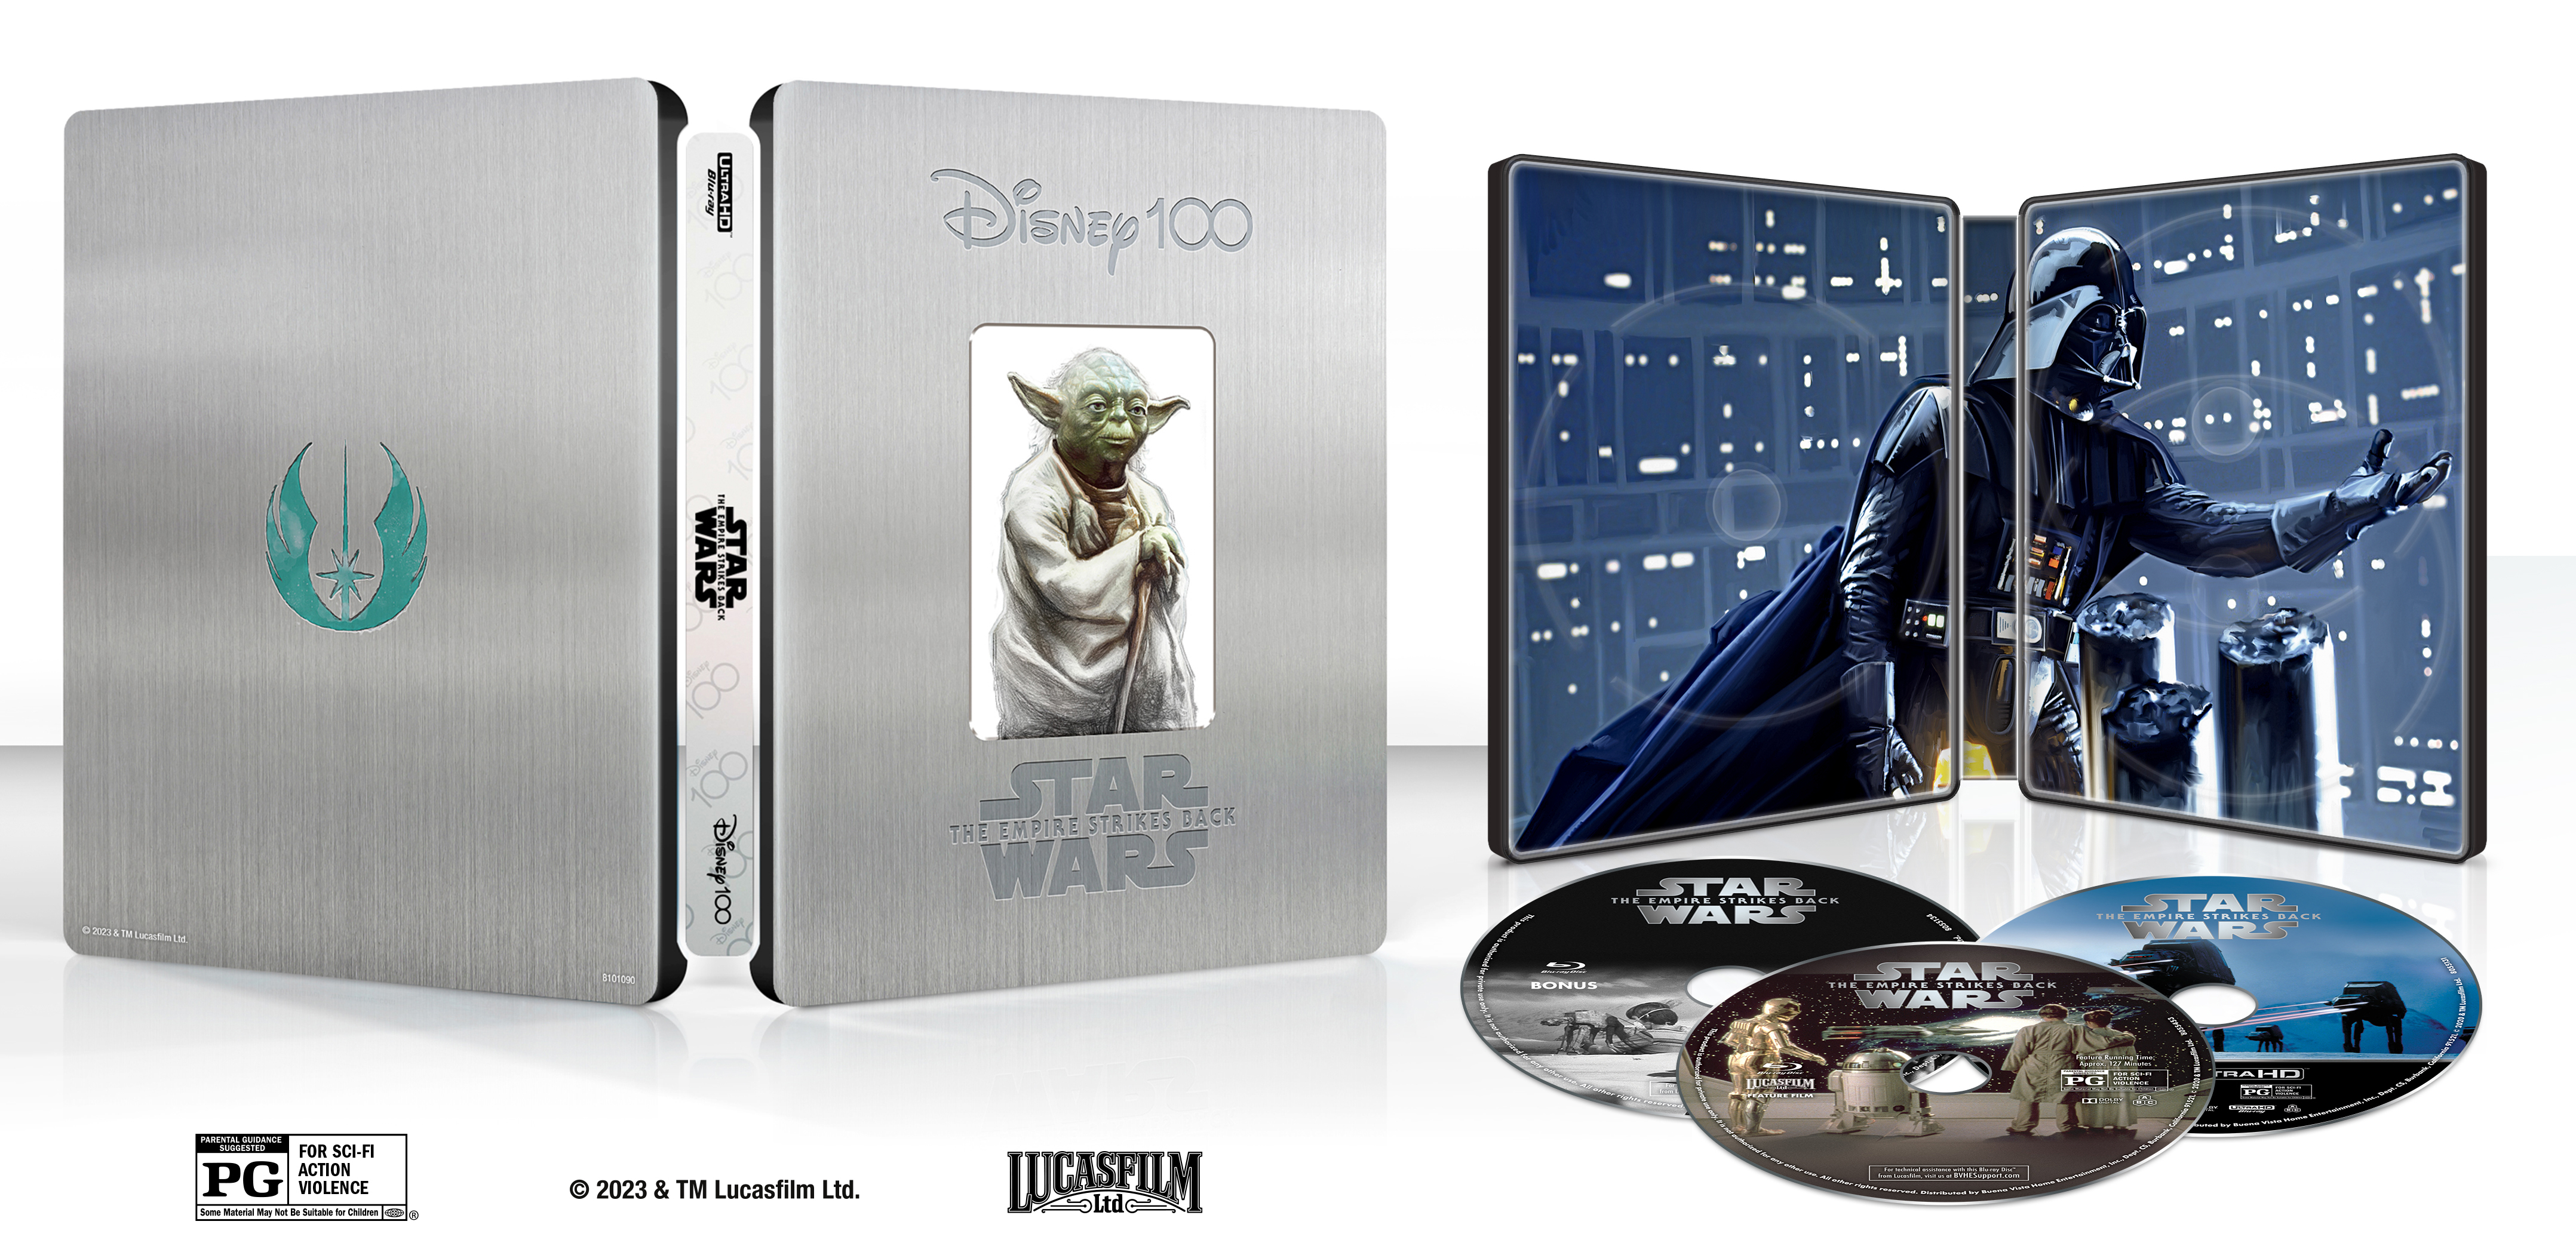 4K Ultra HD Blu-ray and DVD Star Wars Movies & TV Shows - Best Buy